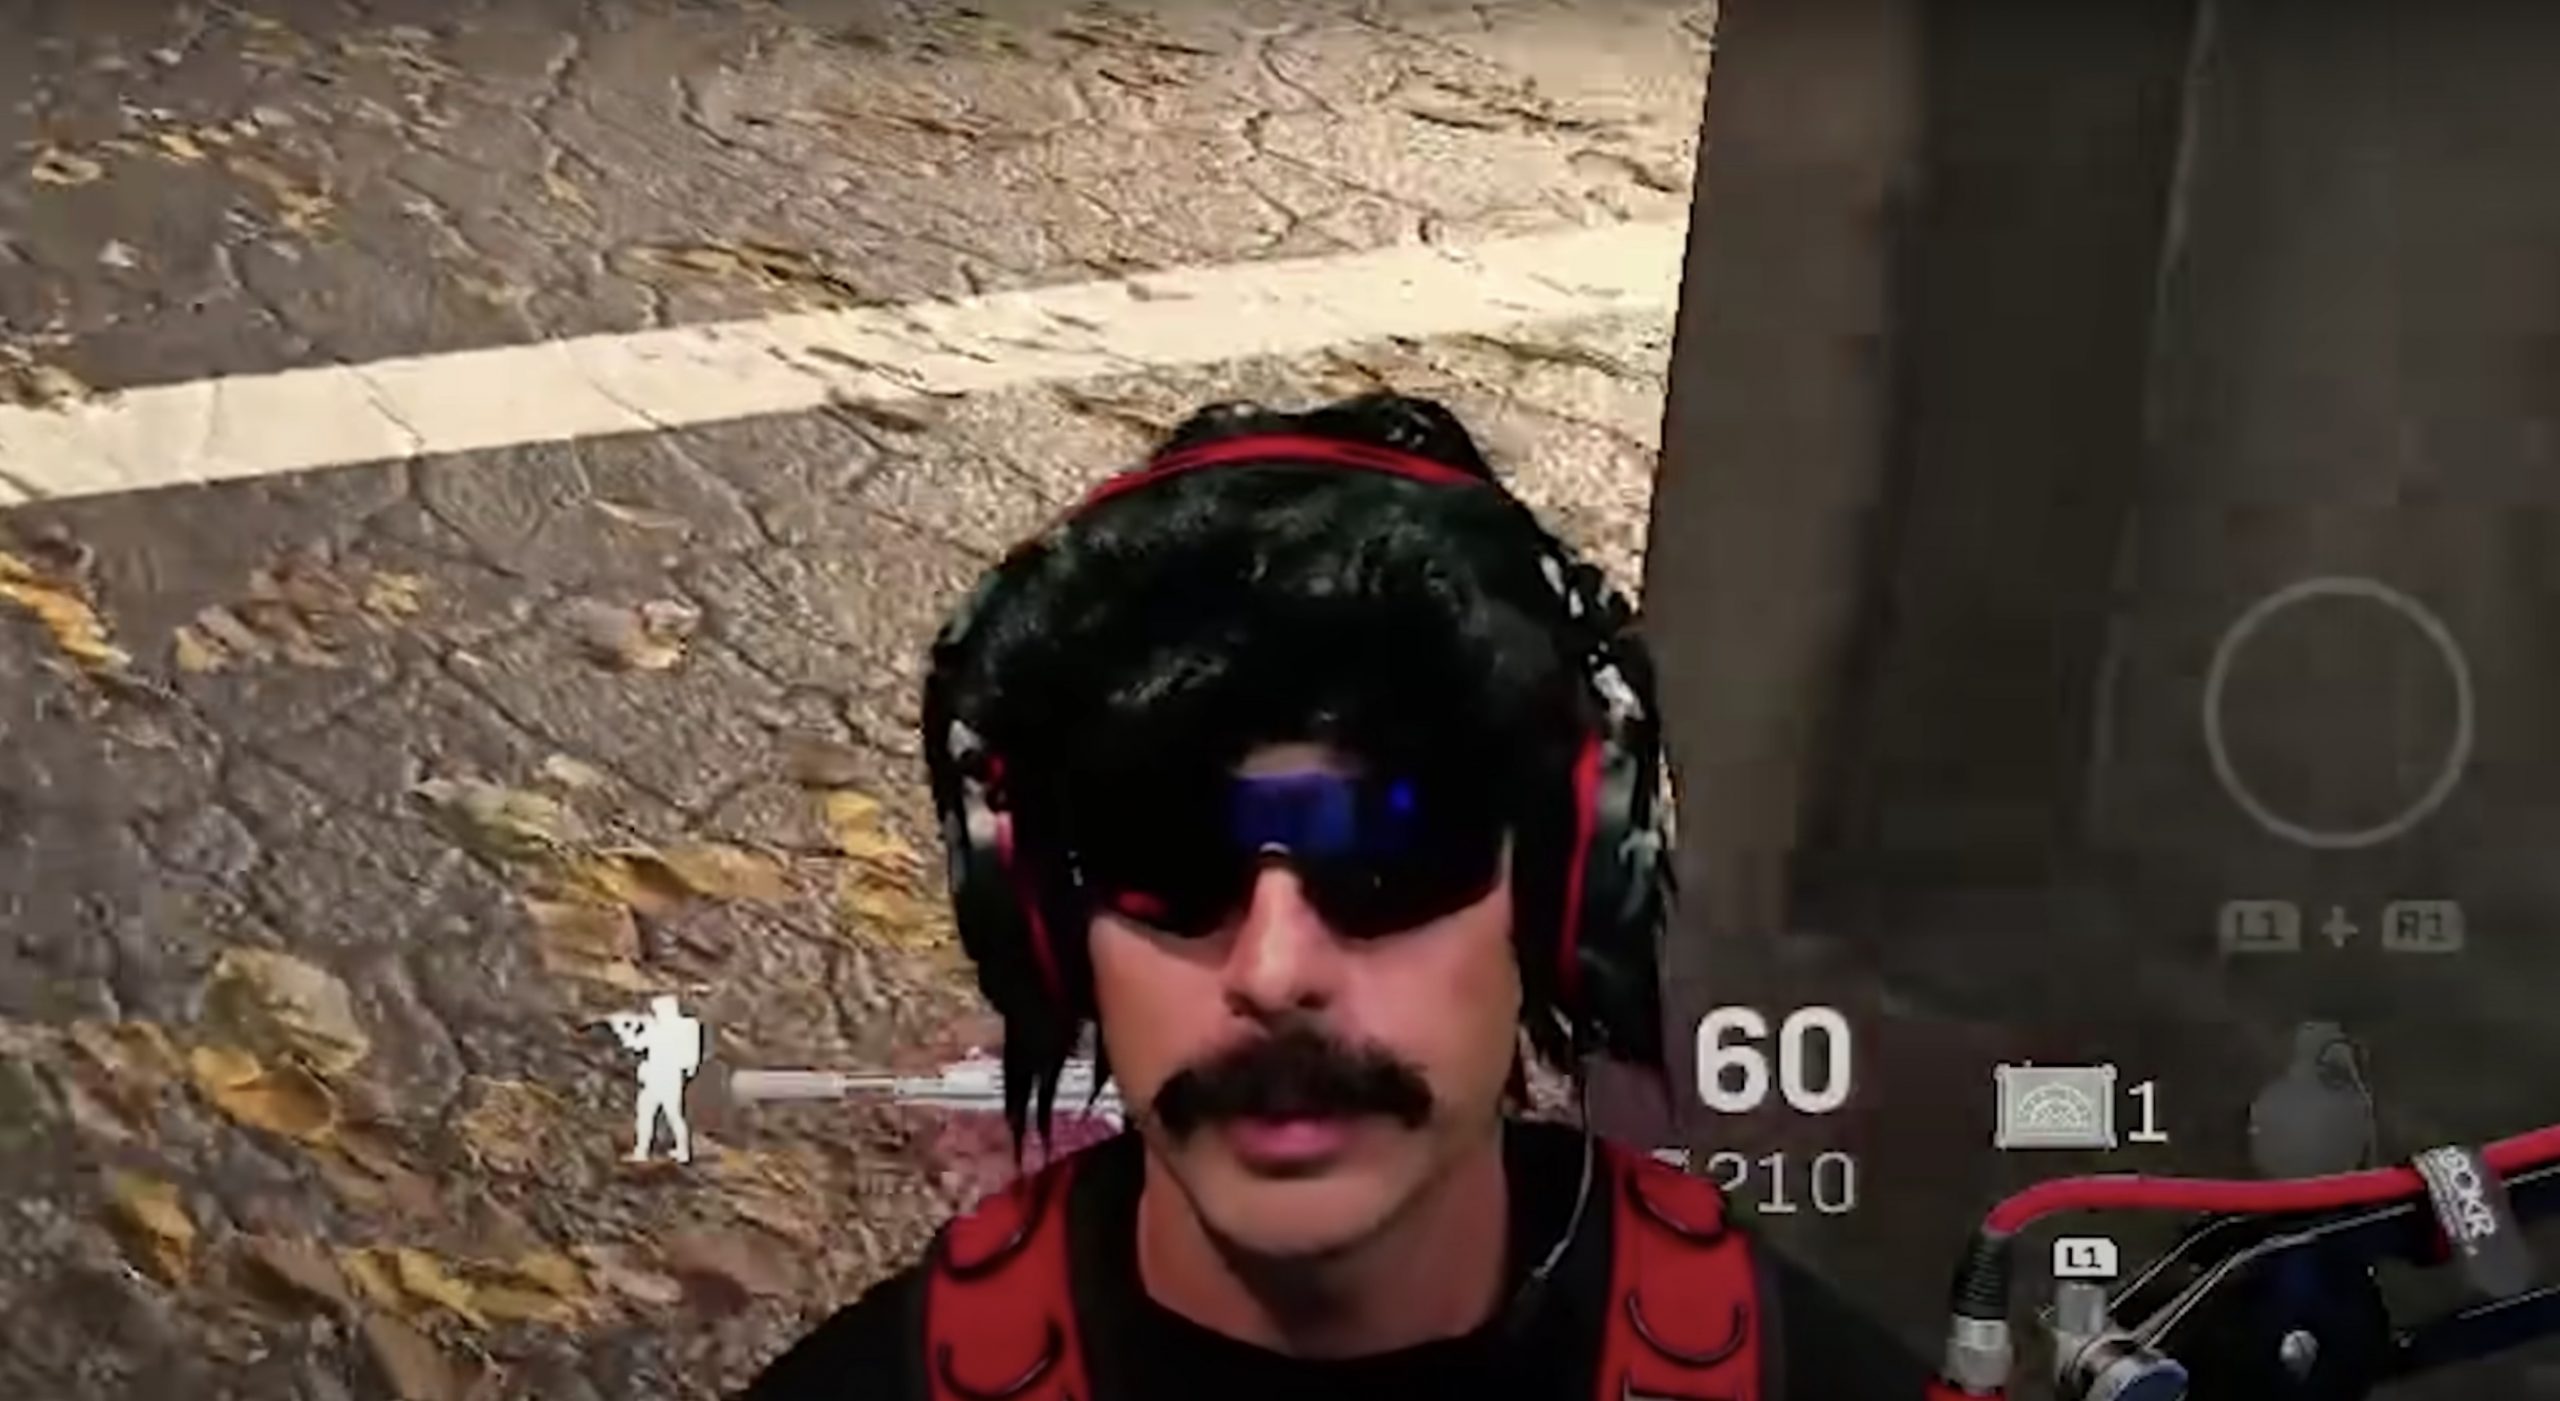 Twitch bans Dr Disrespect over violation of community guidelines | DeviceDaily.com